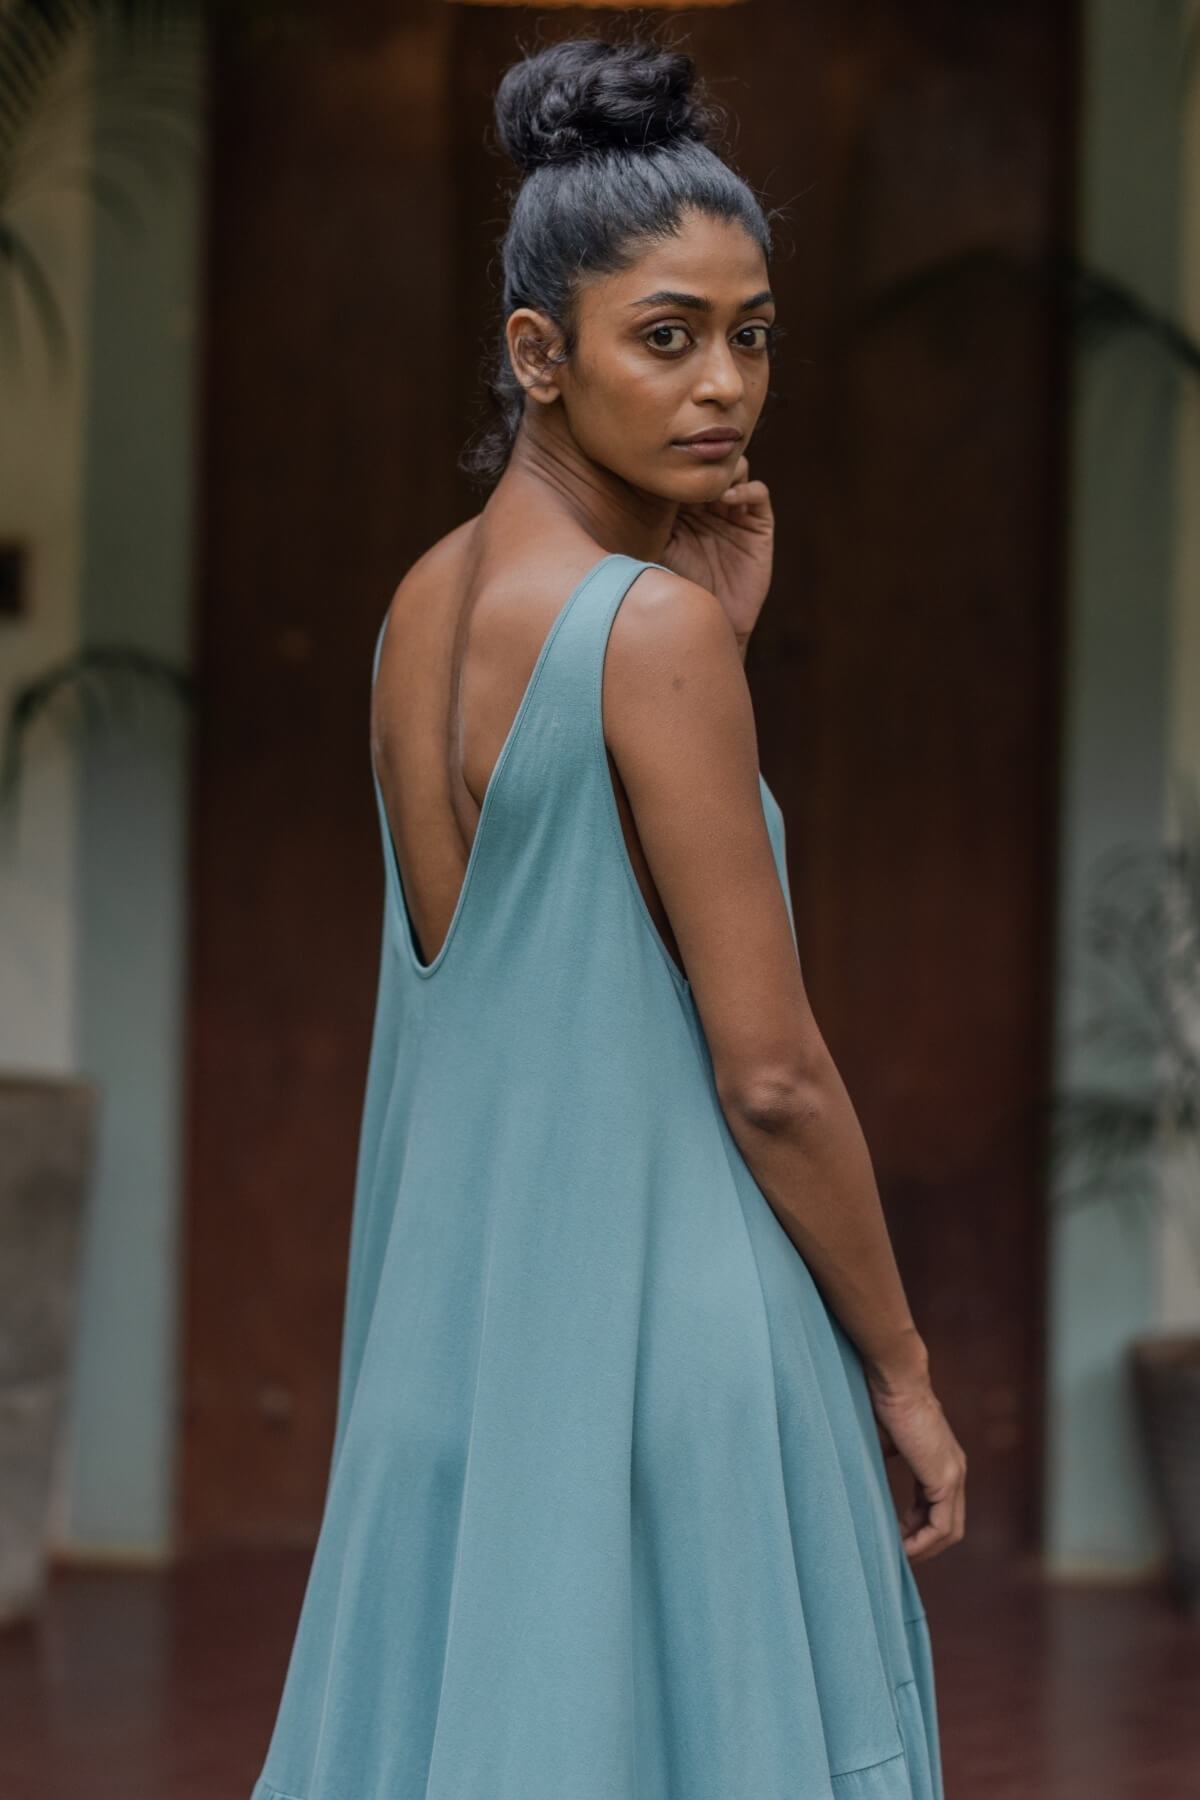 No Nasties - Swing Dresses for Her - Sustainable Fashion Made in India